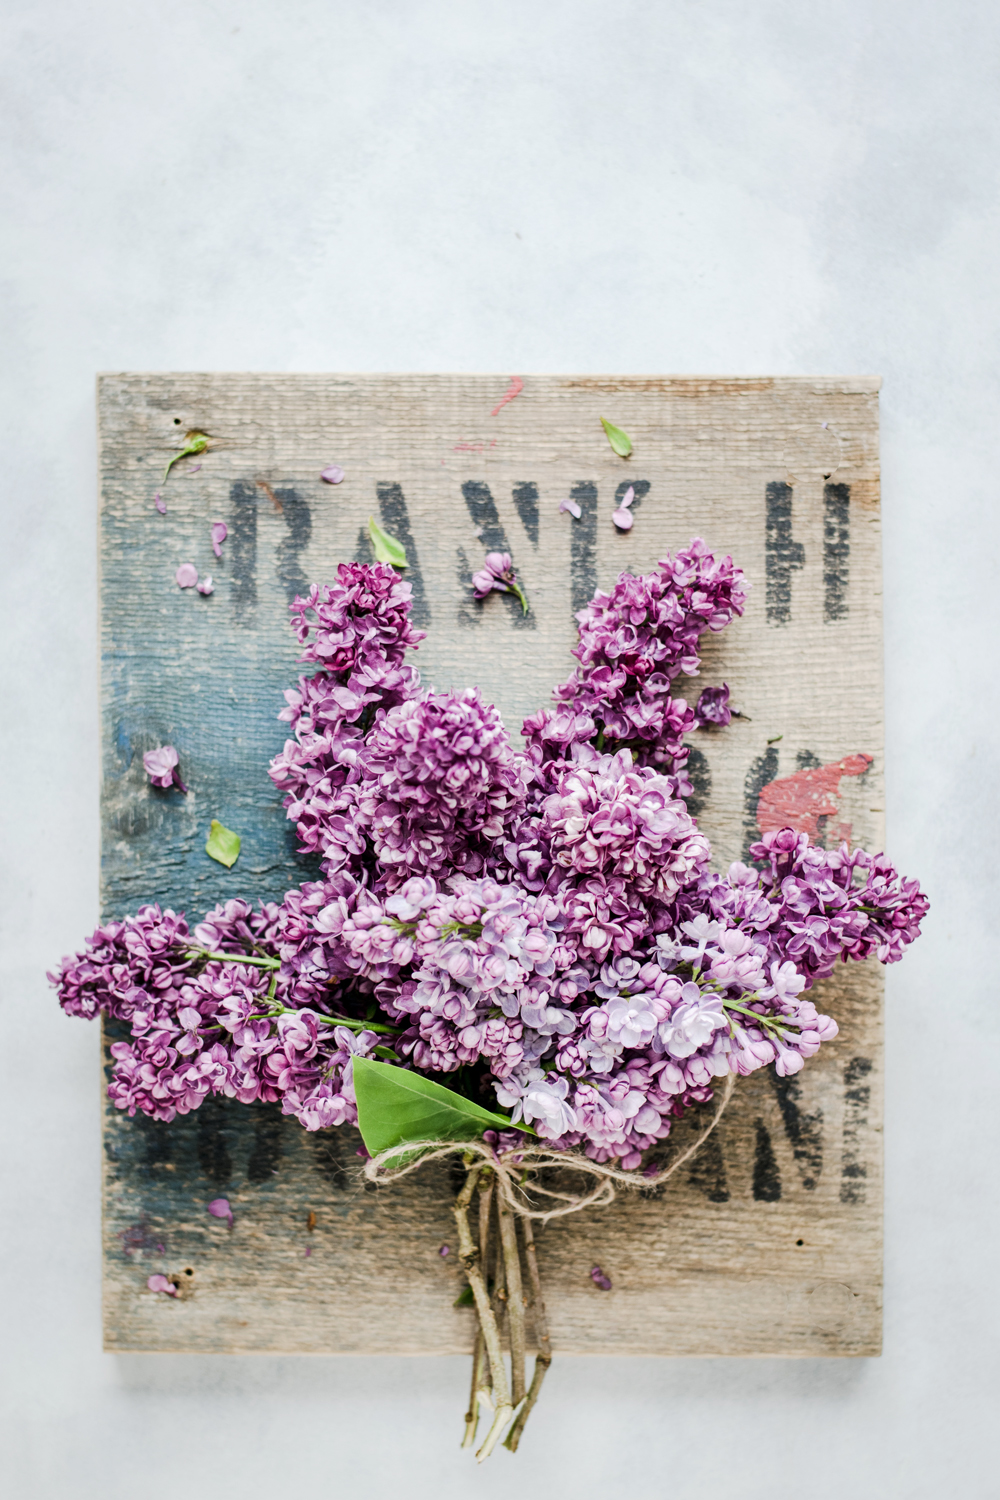 Sprigs of lilac flowers tied together with a string